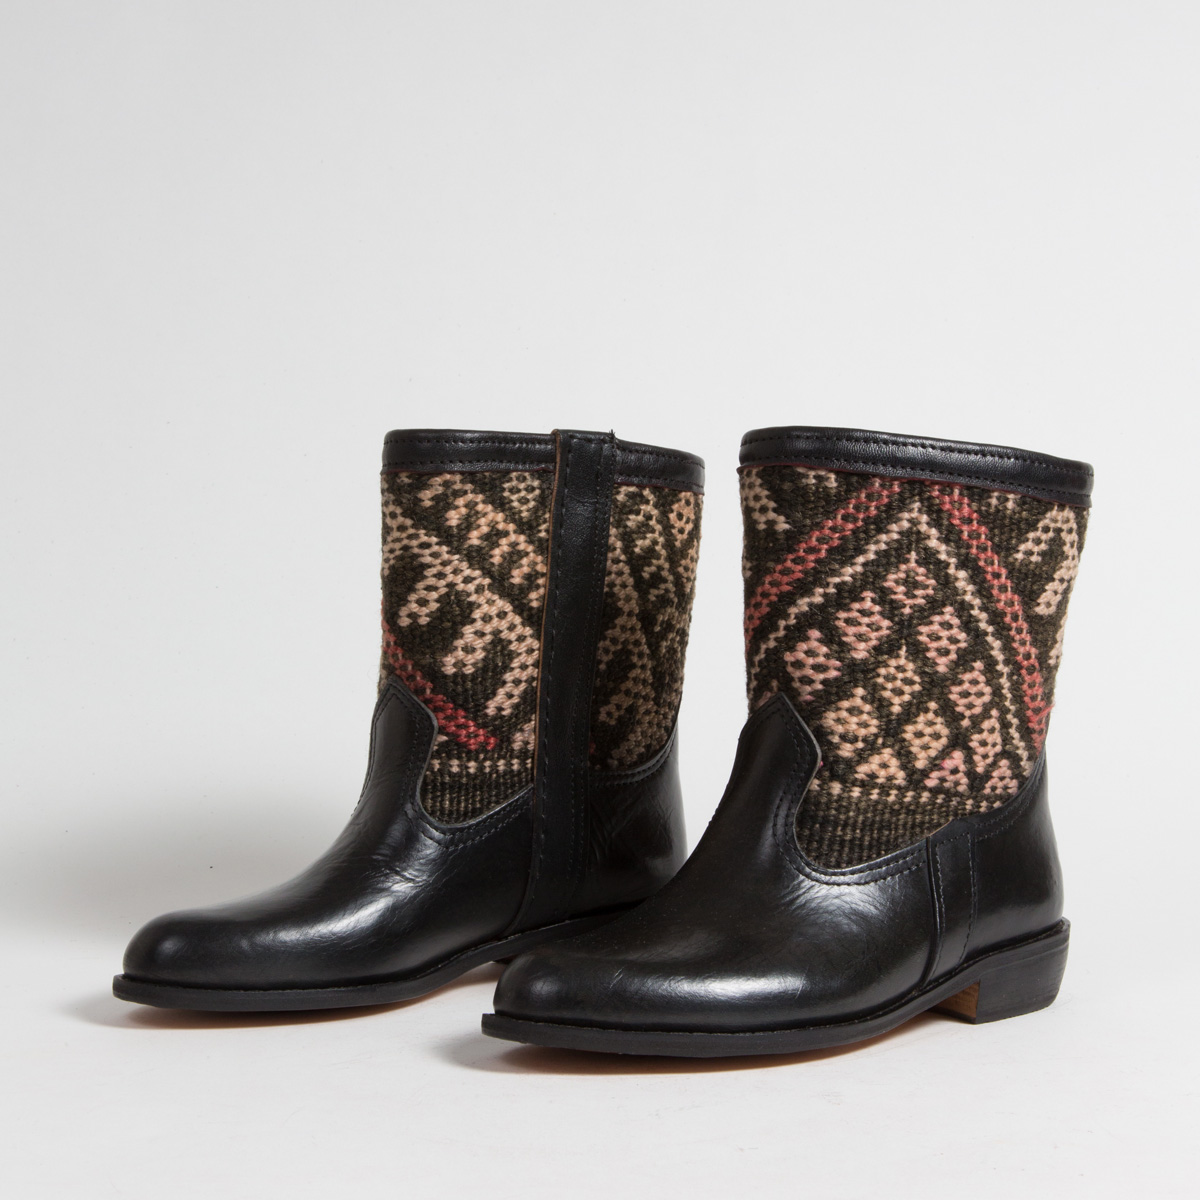 Bottines Kilim cuir mababouche artisanales (Réf. RPN6-37)